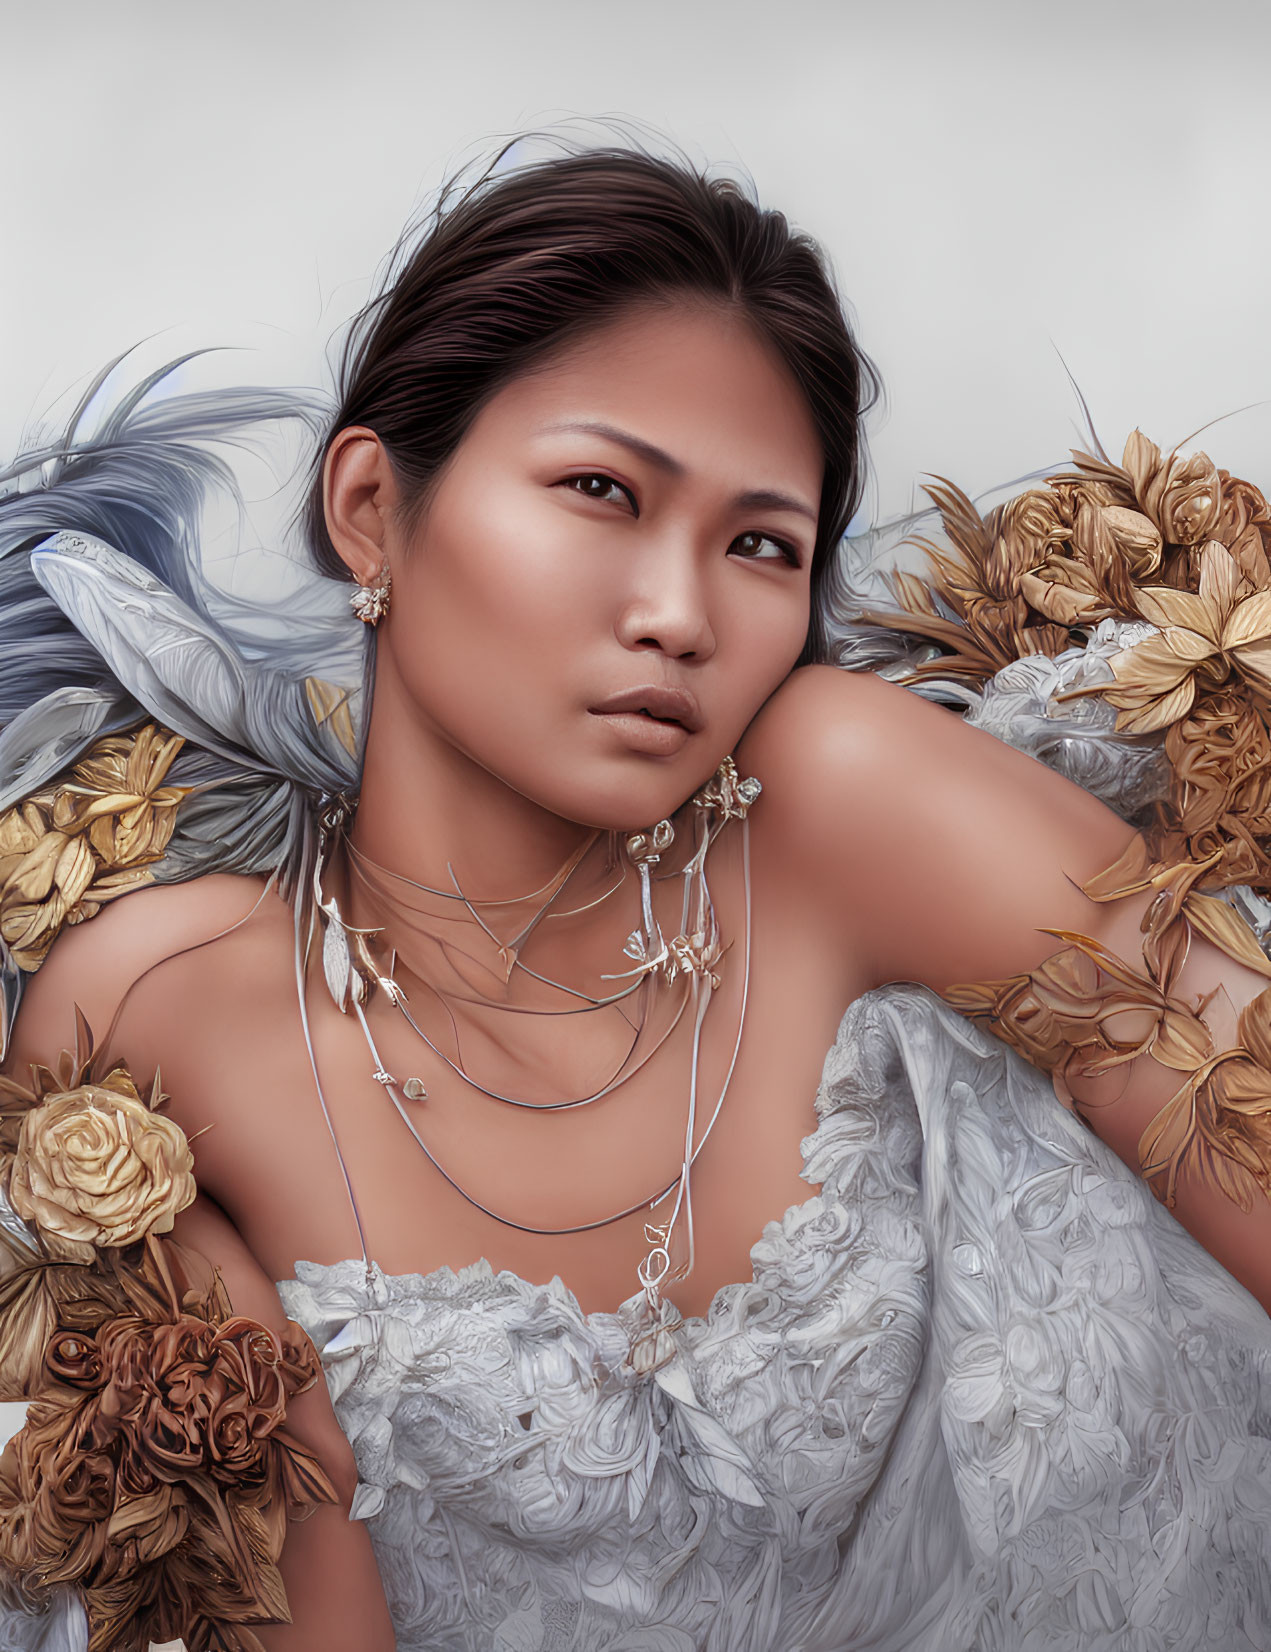 Woman adorned with delicate jewelry in golden flower and feather setting